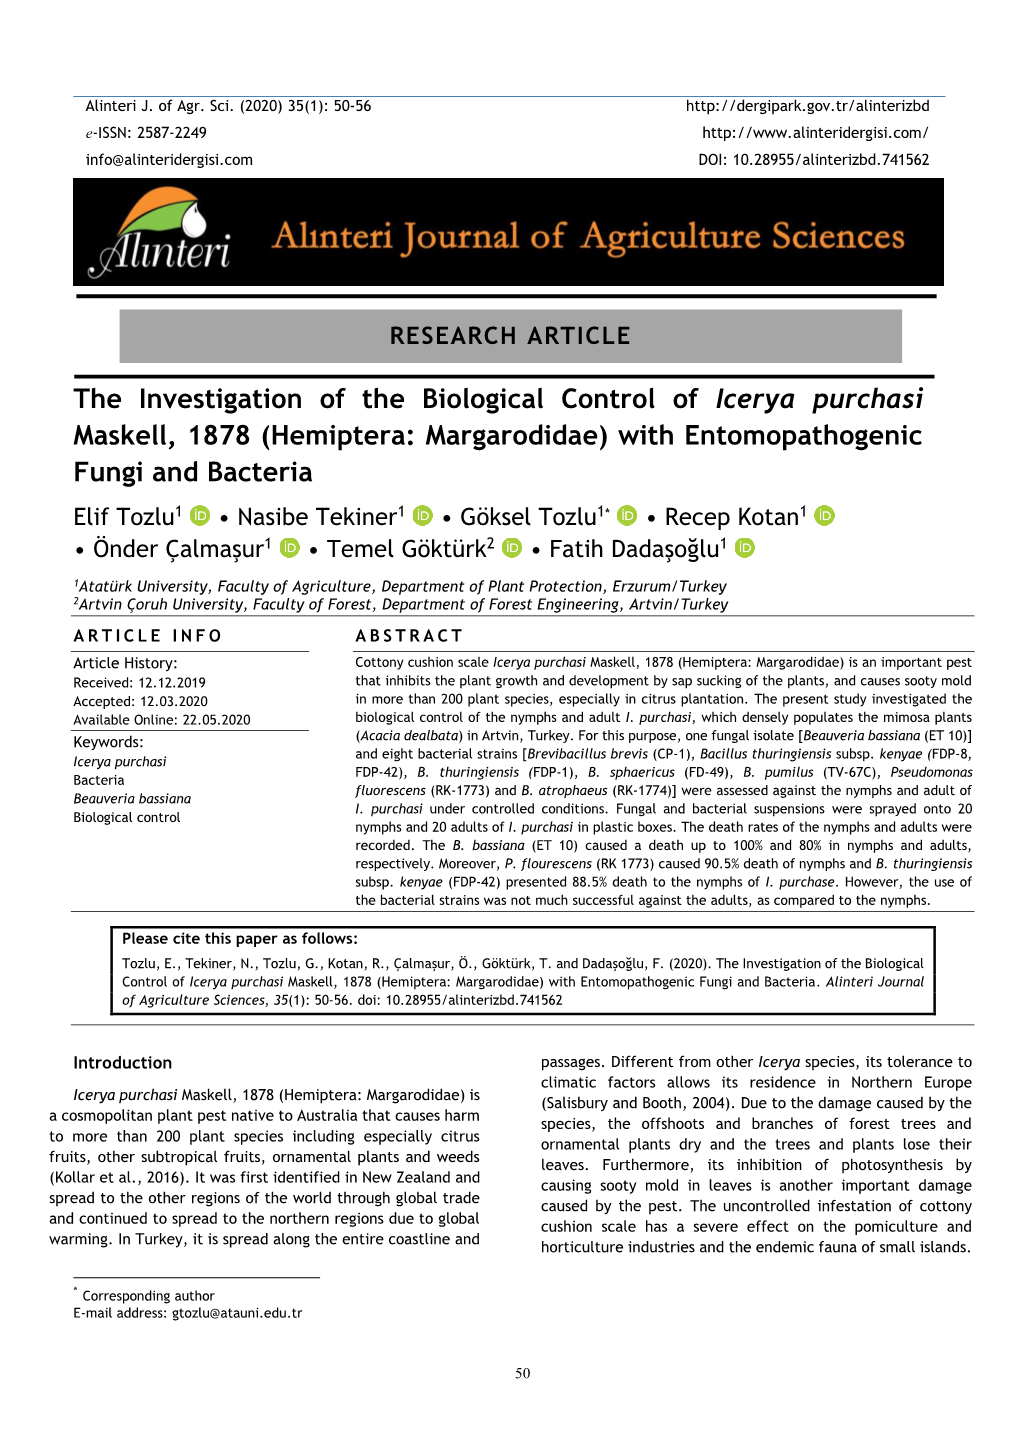 The Investigation of the Biological Control of Icerya Purchasi Maskell